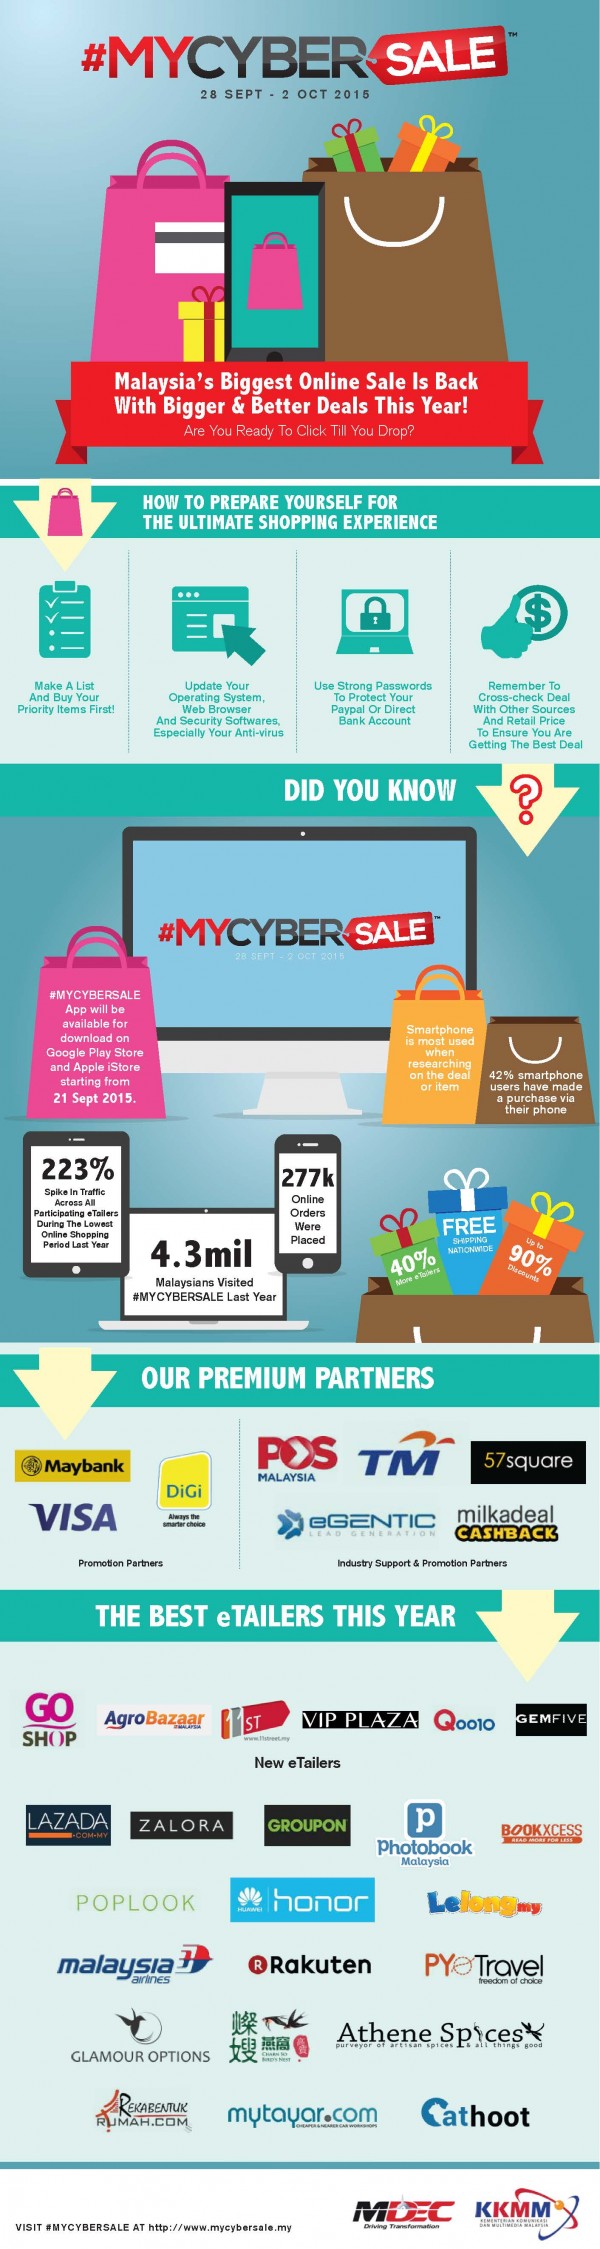 #MYCYBERSALE_Infographic_FINAL